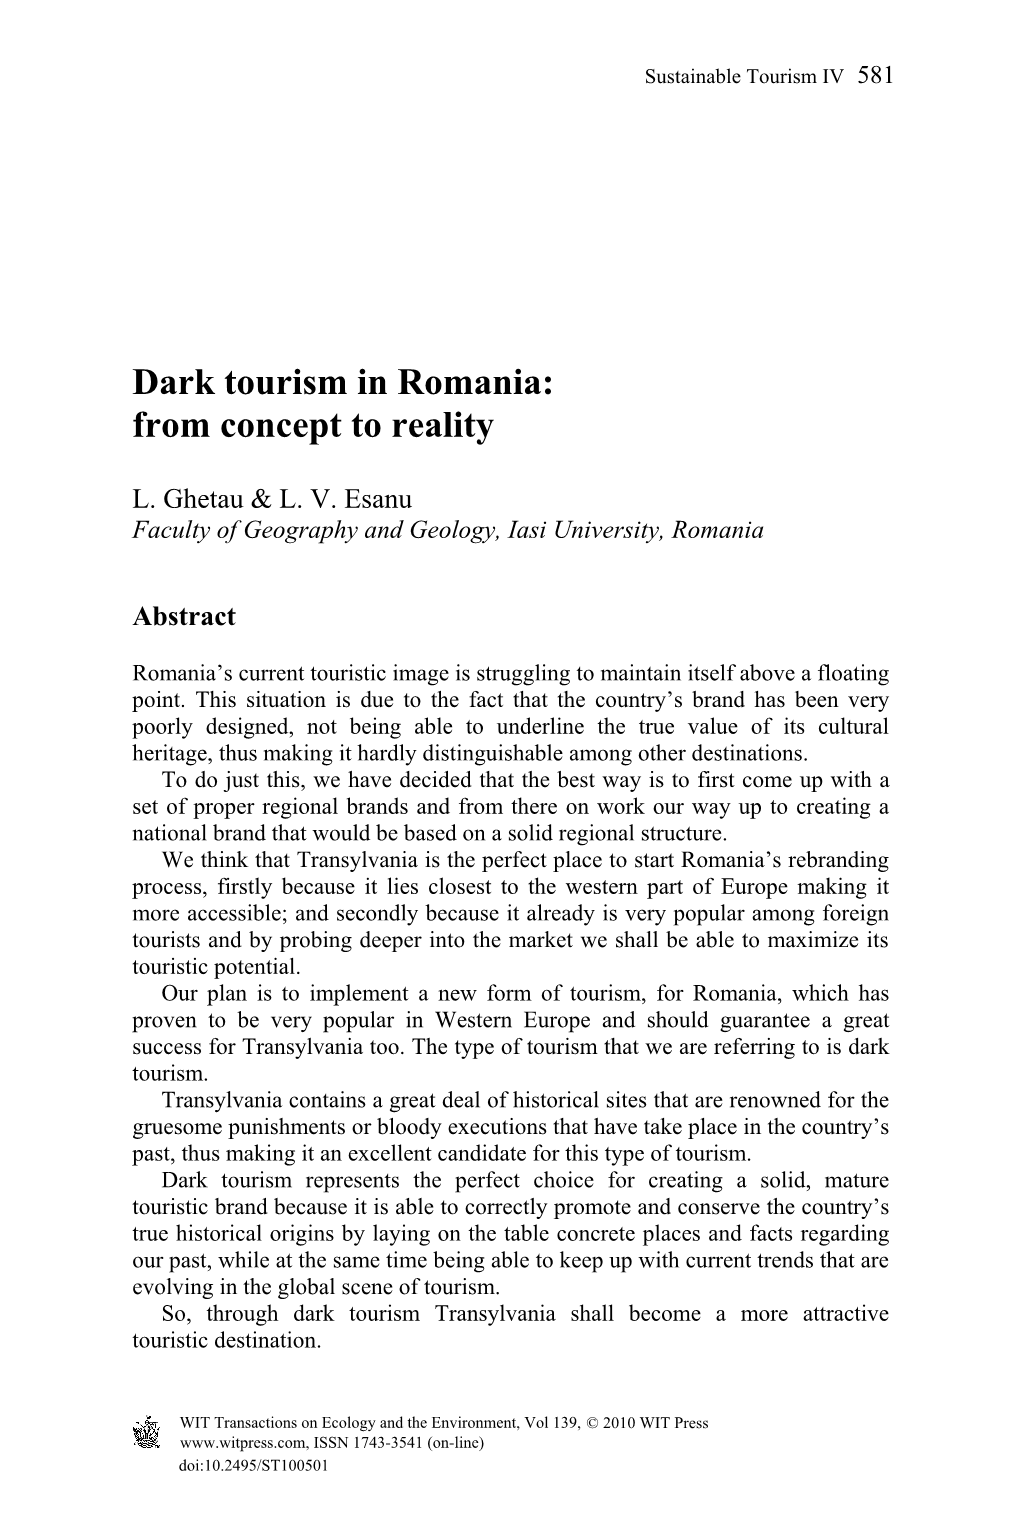 Dark Tourism in Romania: from Concept to Reality